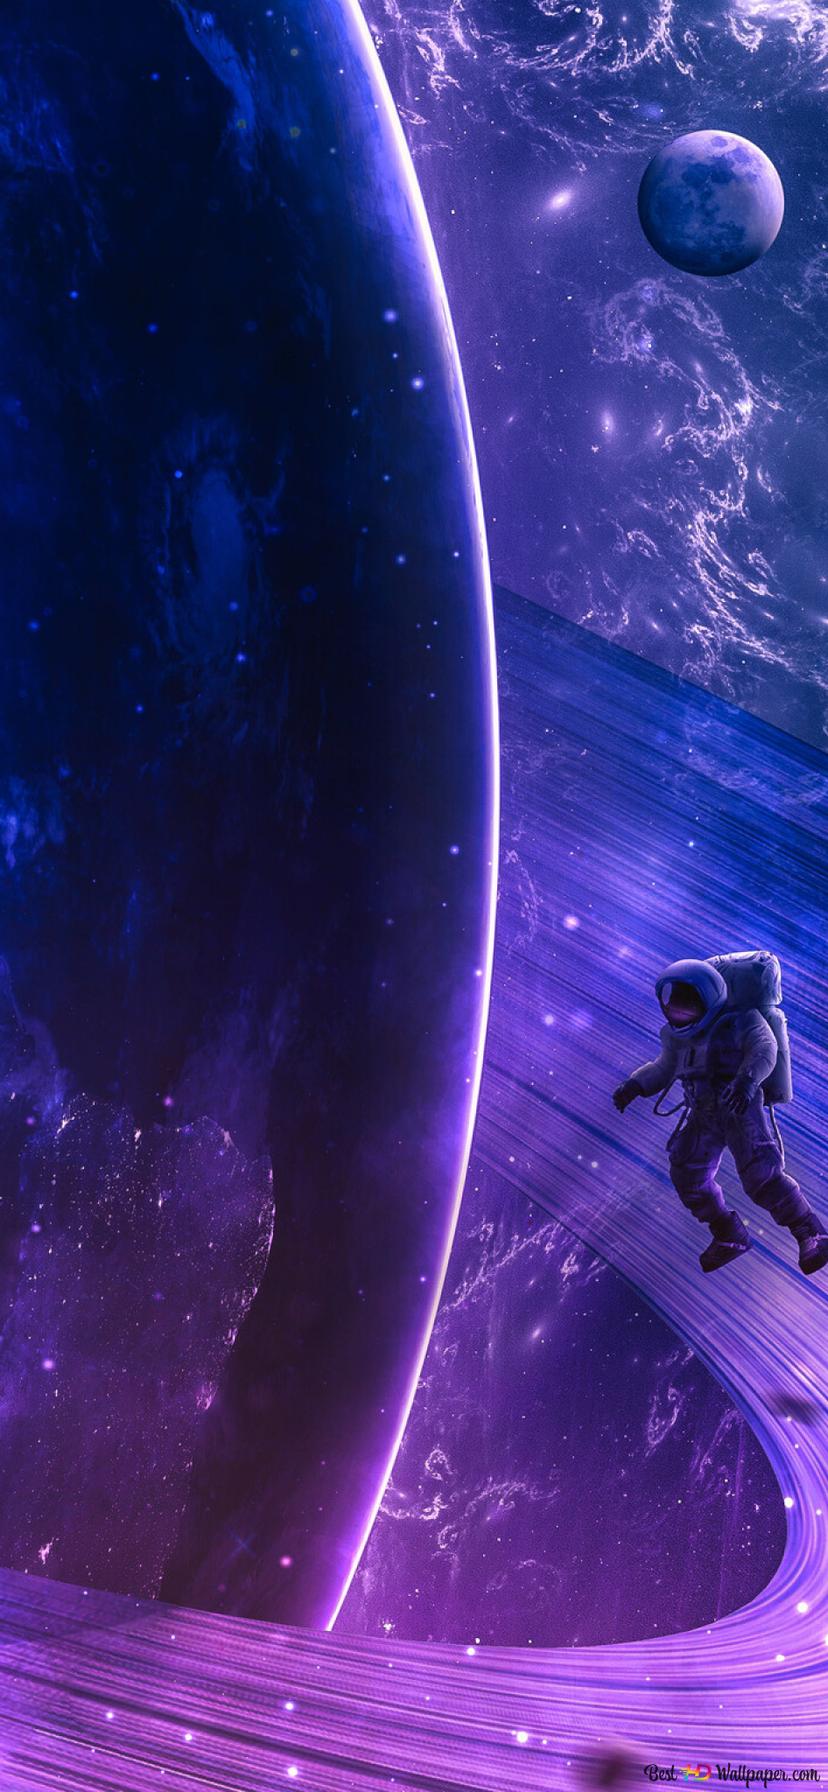 Astronaut wandering on planetary ring 2K wallpaper download